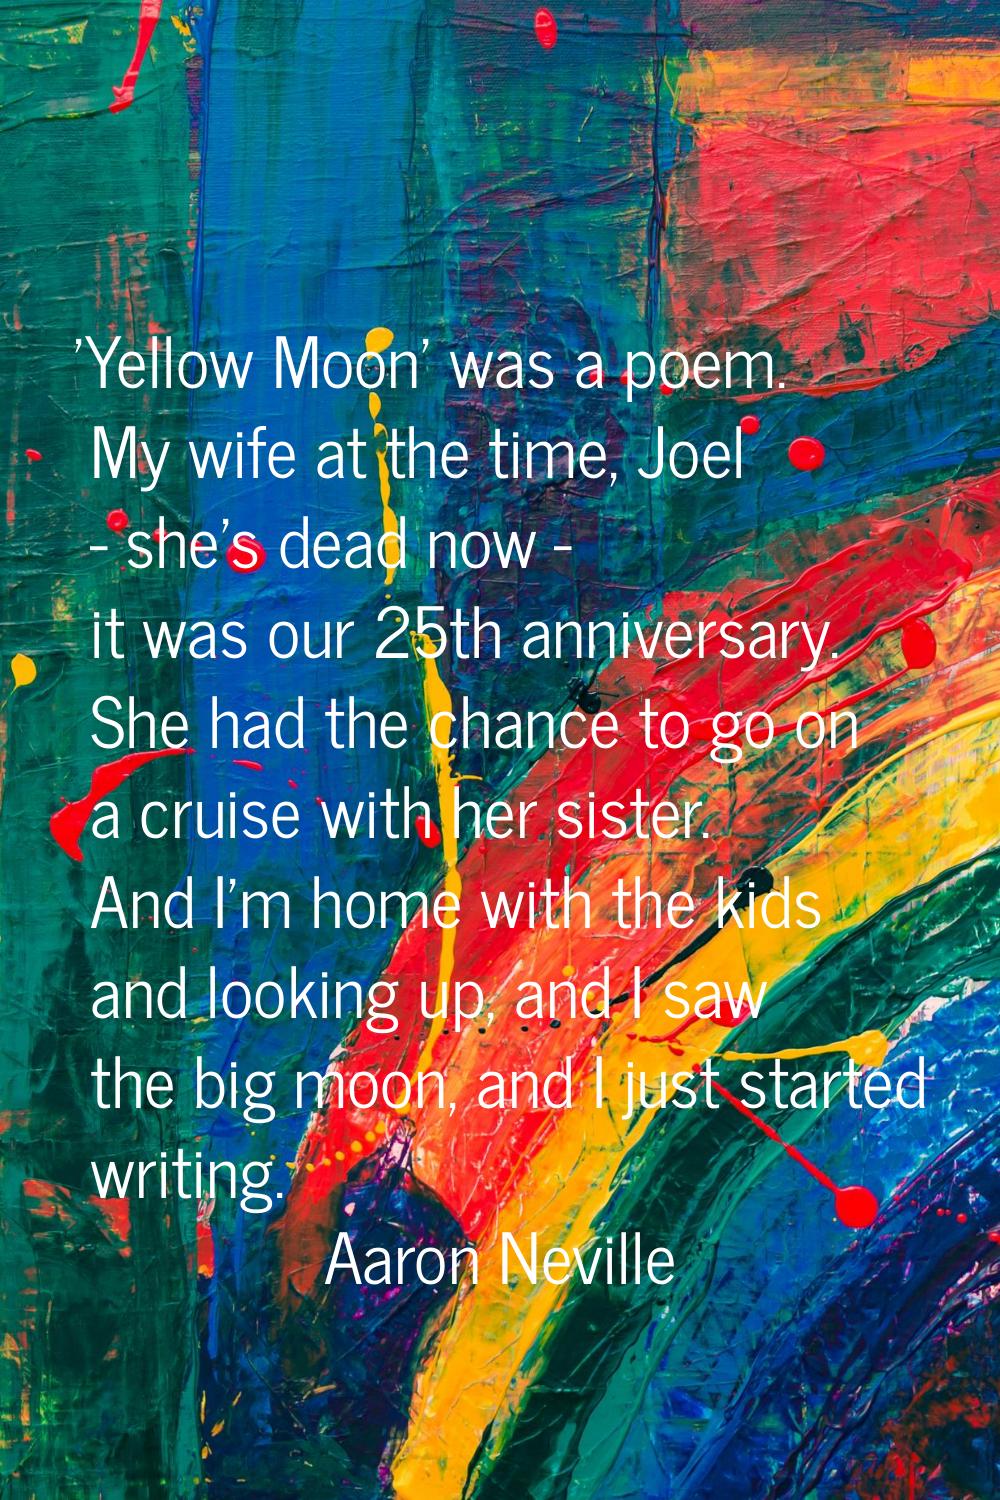 'Yellow Moon' was a poem. My wife at the time, Joel - she's dead now - it was our 25th anniversary.